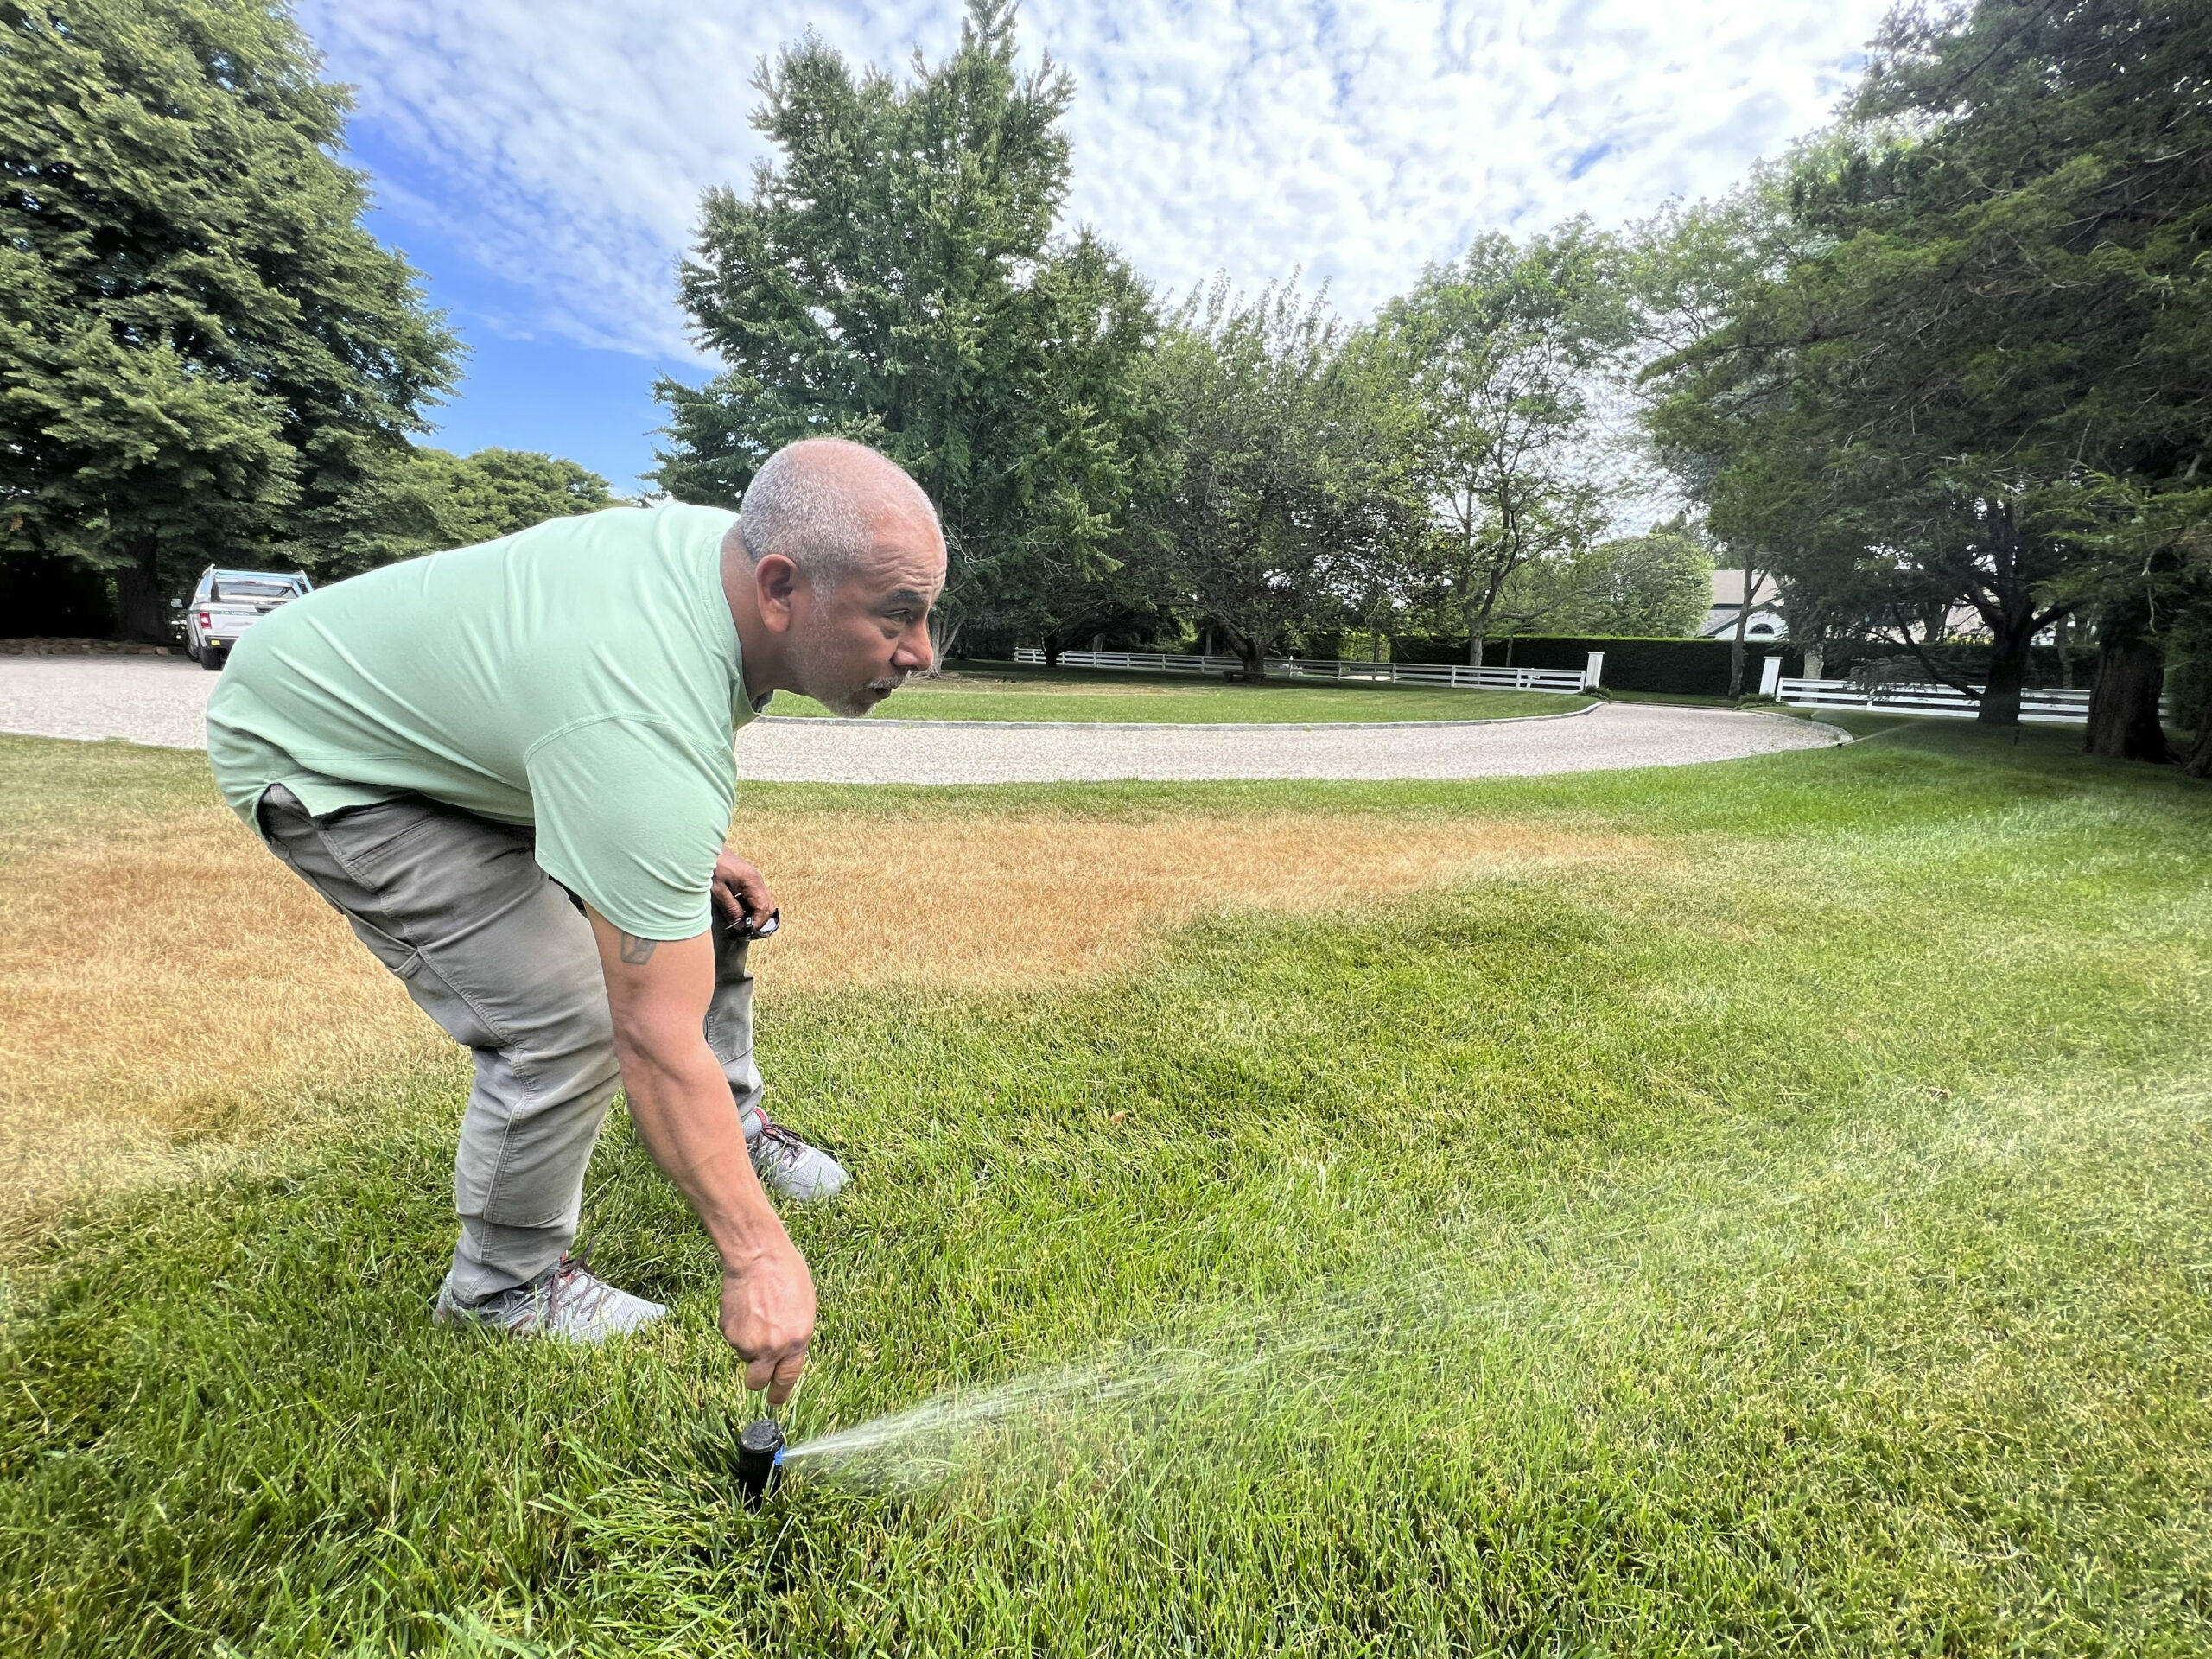 The Suffolk County Water Authority has adopted a policy that calls on homeowners to run their sprinklers only on alternate days in summer.